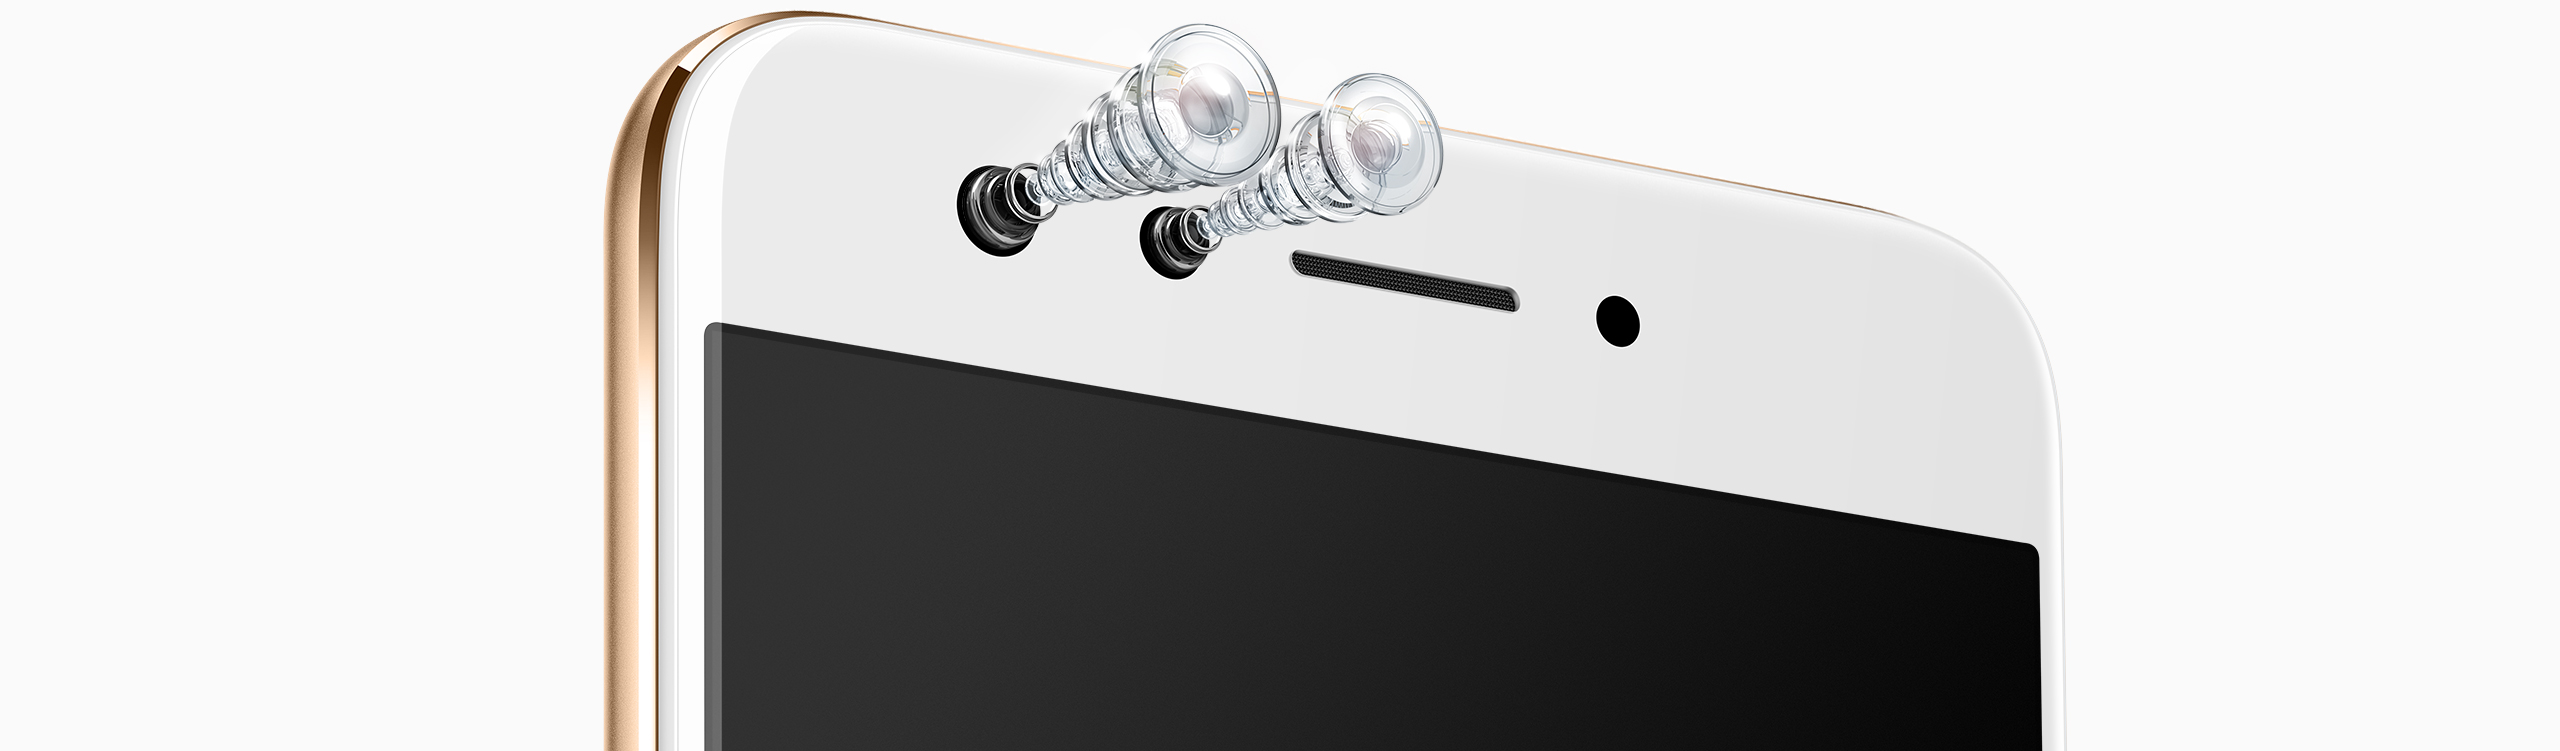  powerful Oppo F3 Selfie double Camera system